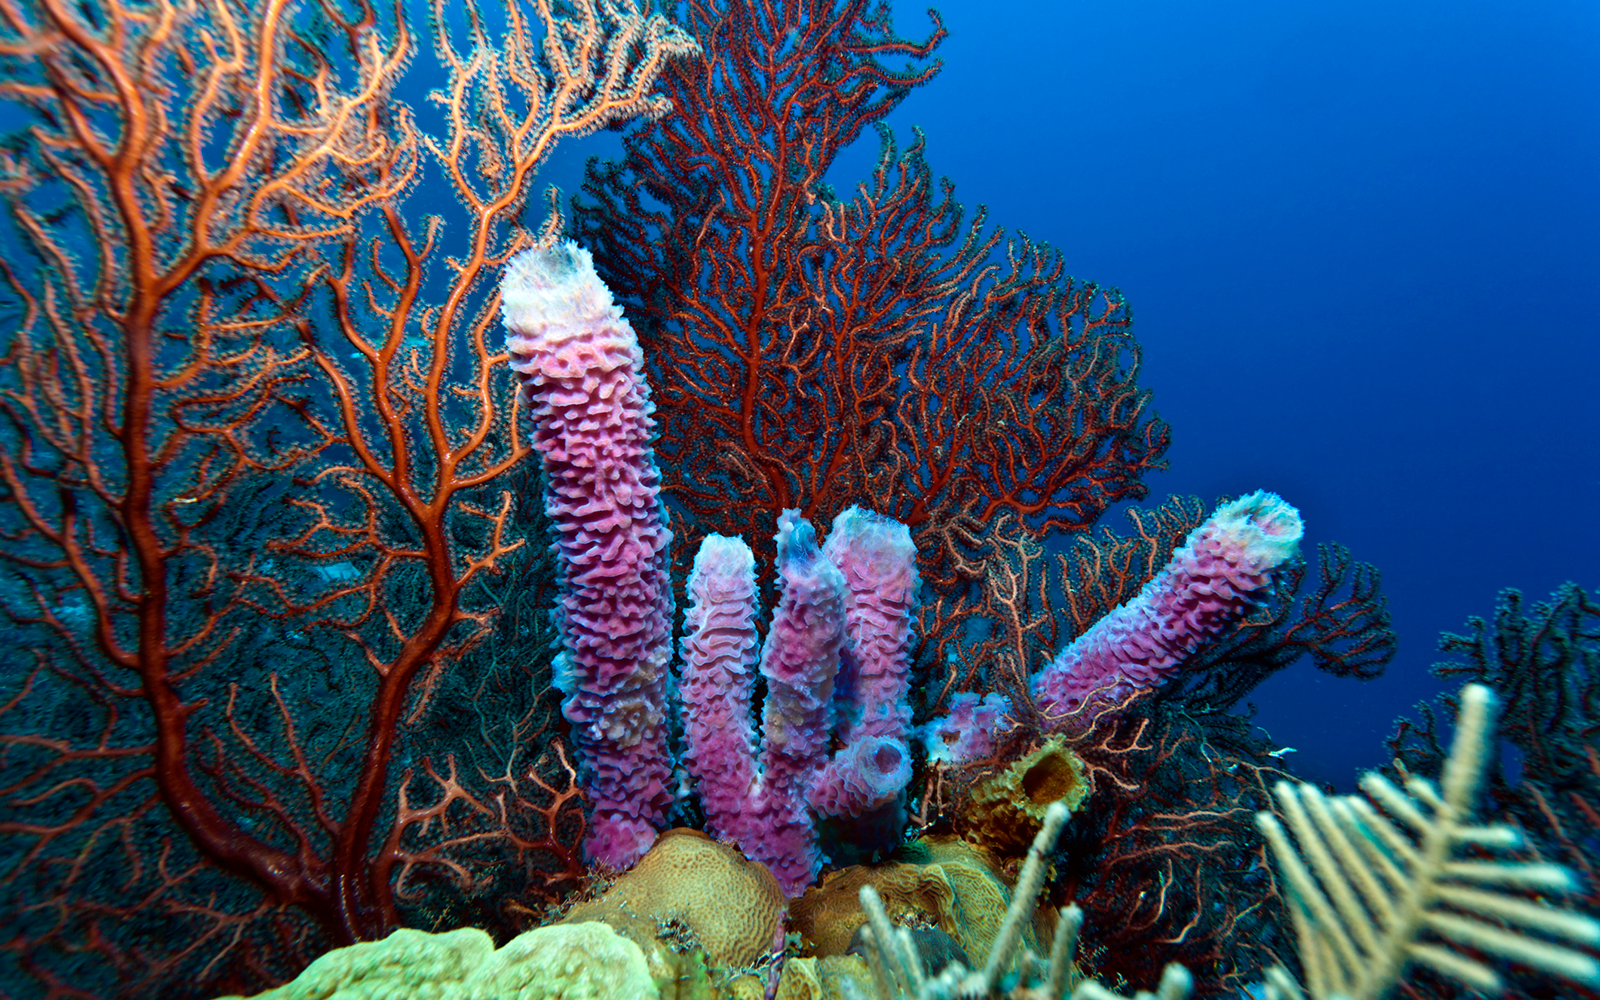 Pink and red coral in a reef surrounded by blue water.